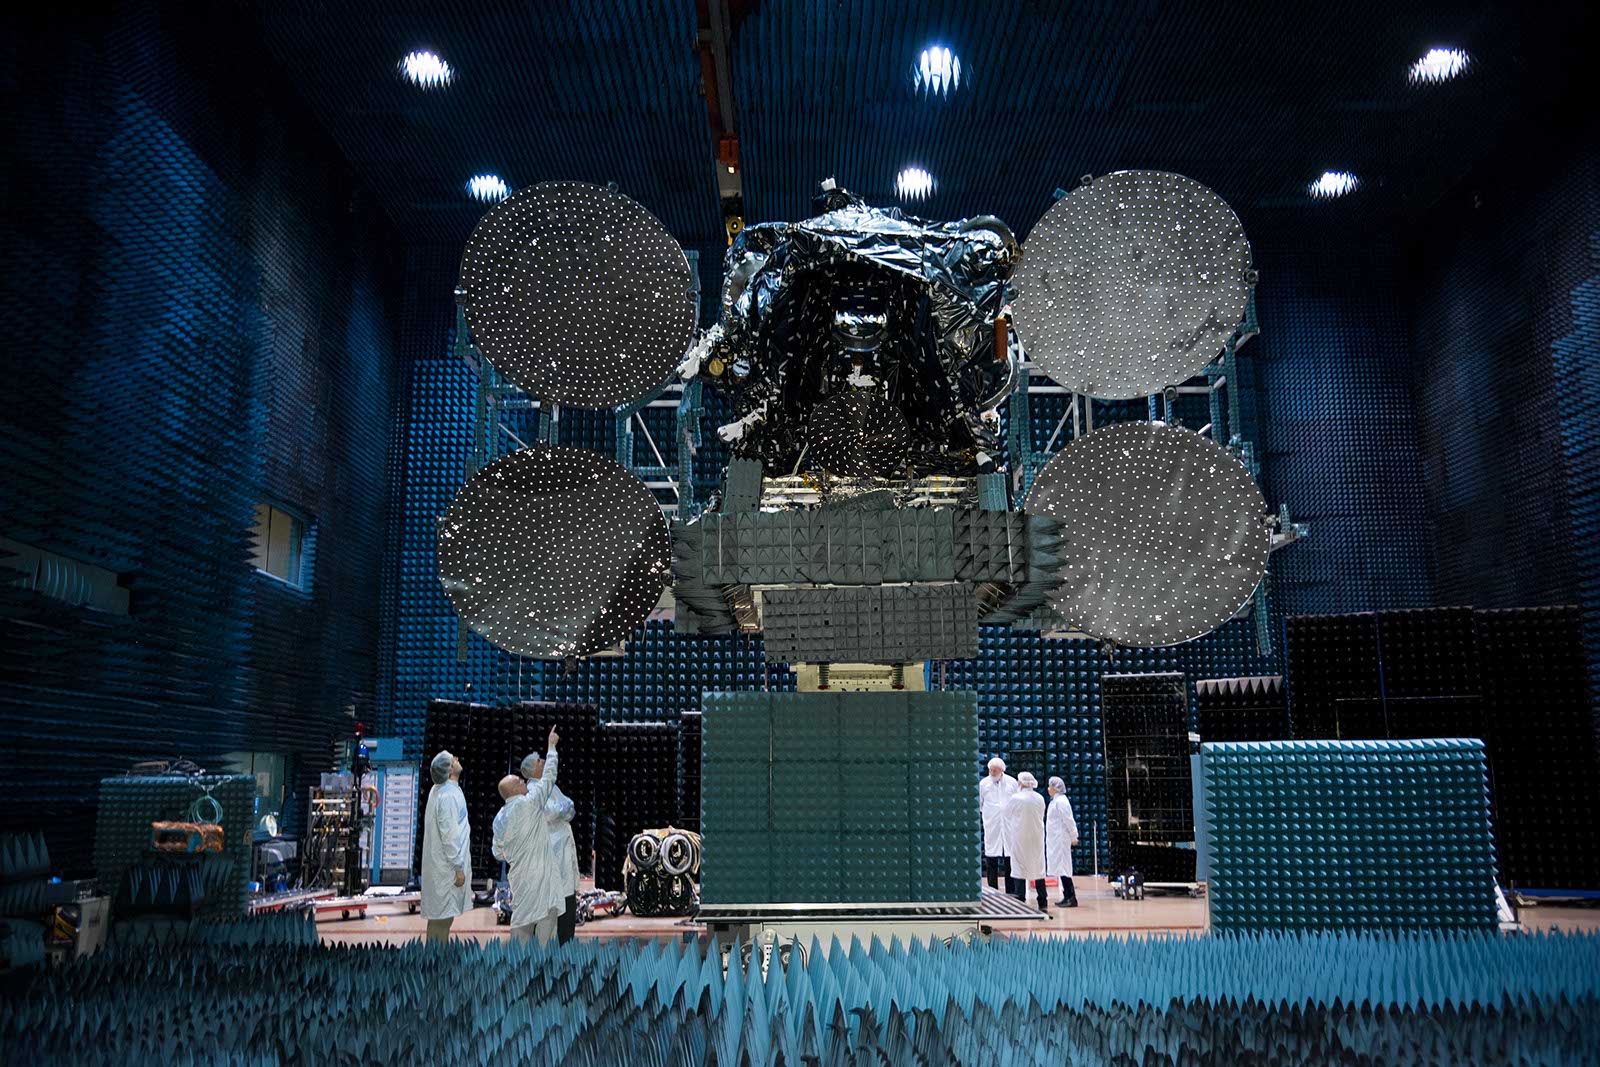 The SSL-built Azerspace-2/Intelsat 38 communications satellite has arrived at the Arianespace launch base. Image courtesy of SSL.